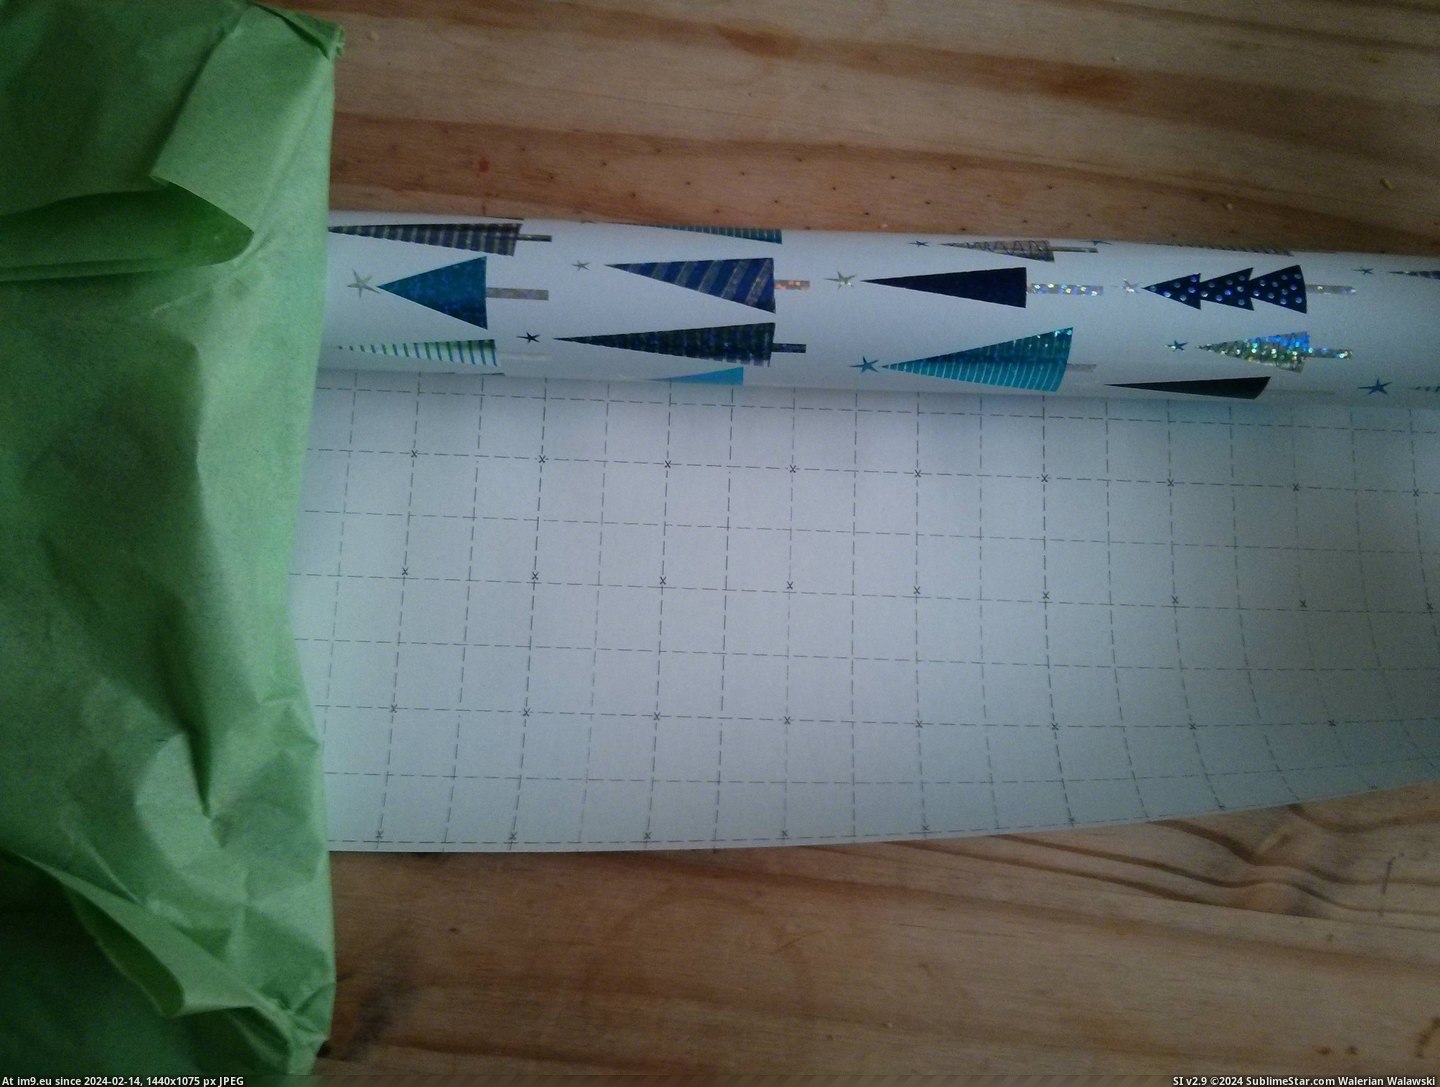 #Christmas #Lines #Wrapping #Scissor #Guide #Paper [Mildlyinteresting] My Christmas wrapping paper has scissor guide lines Pic. (Изображение из альбом My r/MILDLYINTERESTING favs))